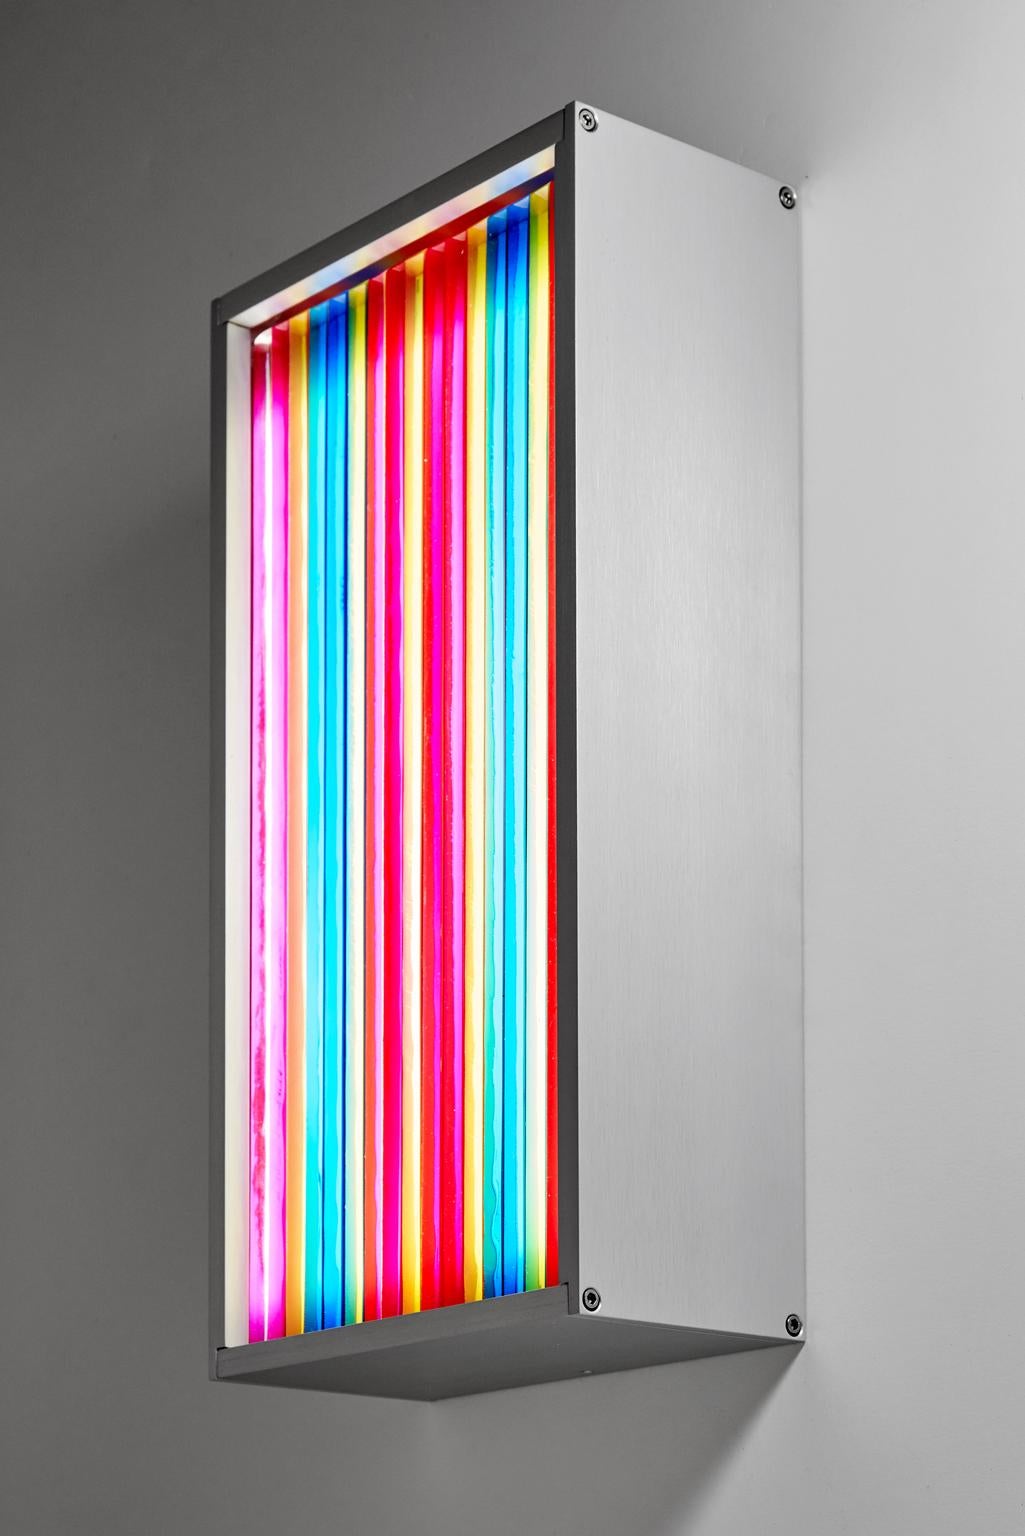 This wall sconce is created by laminating clear glass pieces together in a multicolored vertical pattern using pigmented adhesive. An LED light panel illuminates the glass and transparent pigment from behind. In a sense, the glass acts as a lens,